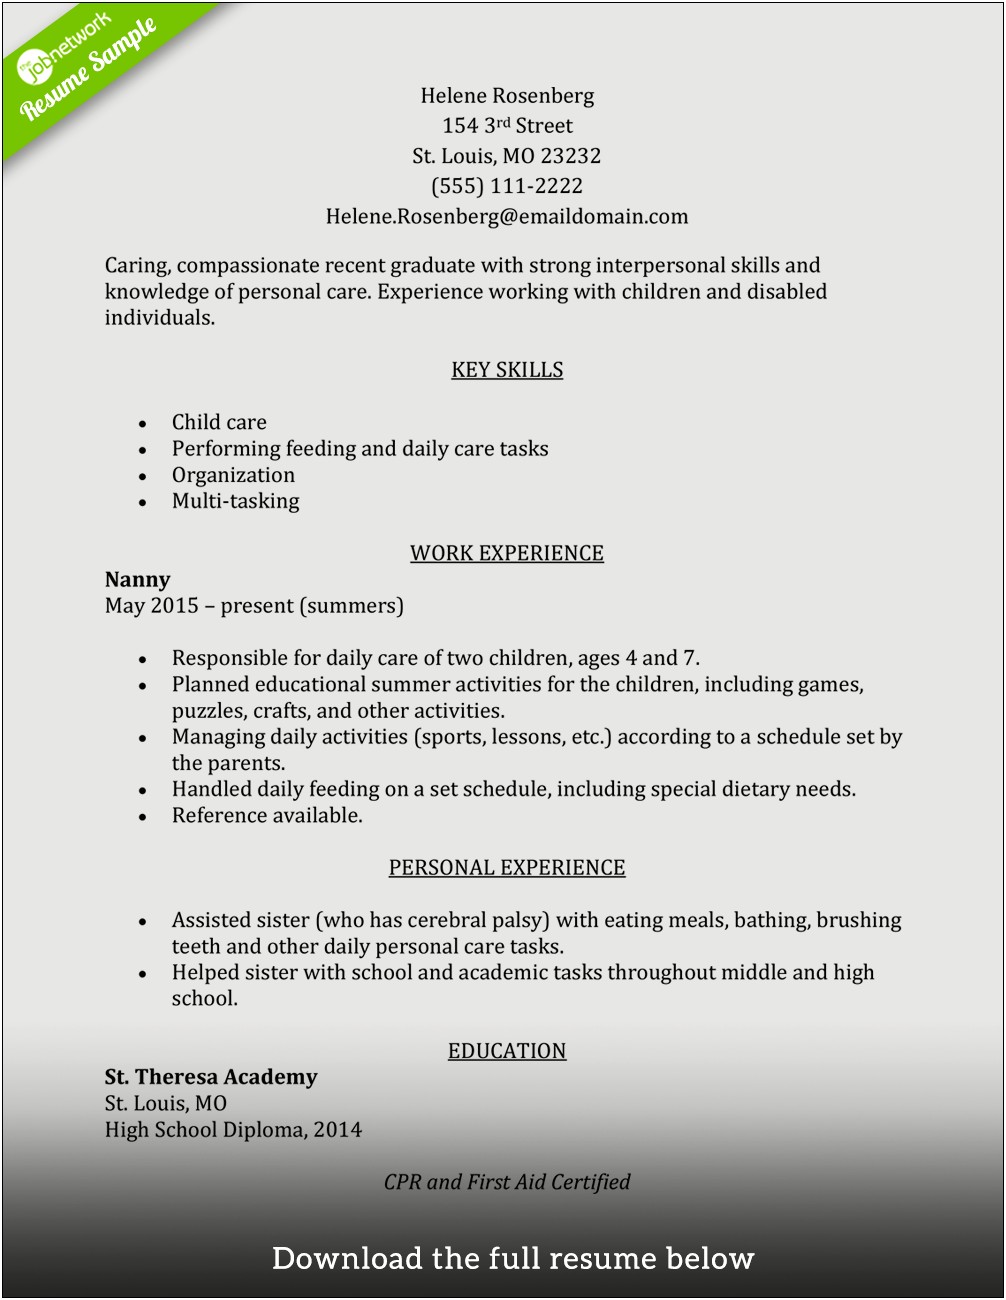 Resume Objective For Child Care Provider